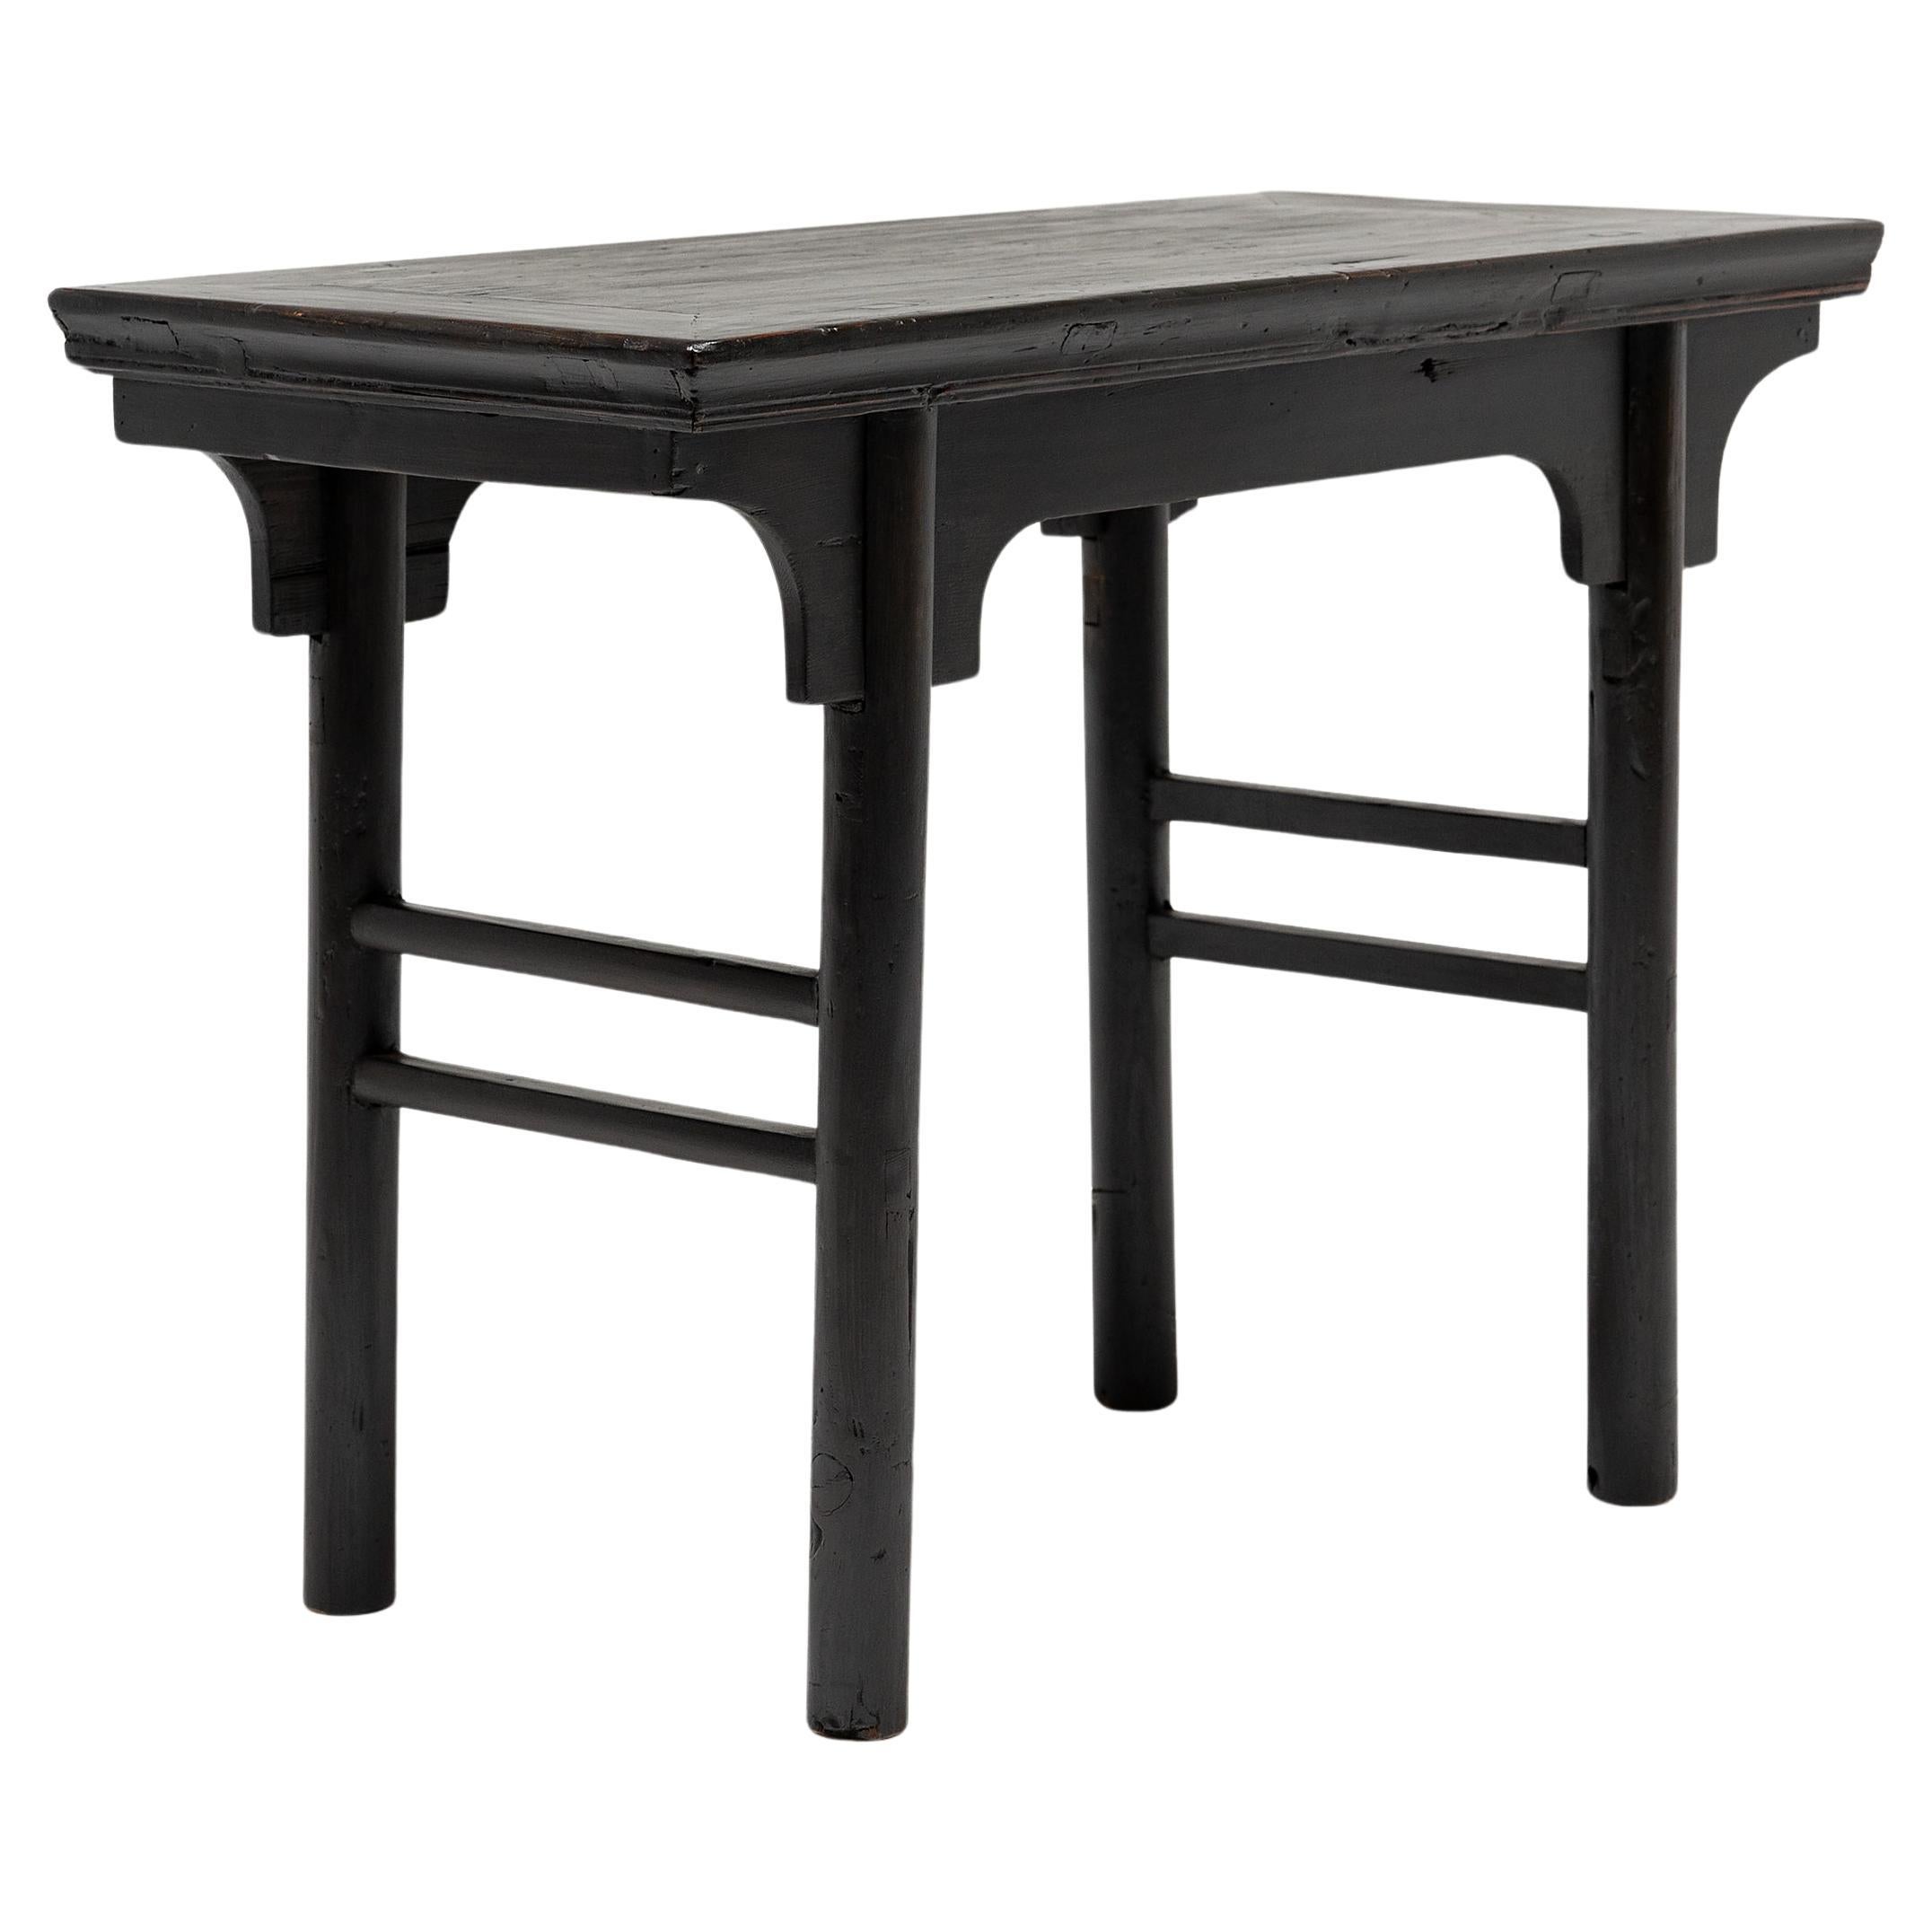 Chinese Black Lacquer Wine Table, c. 1900 For Sale